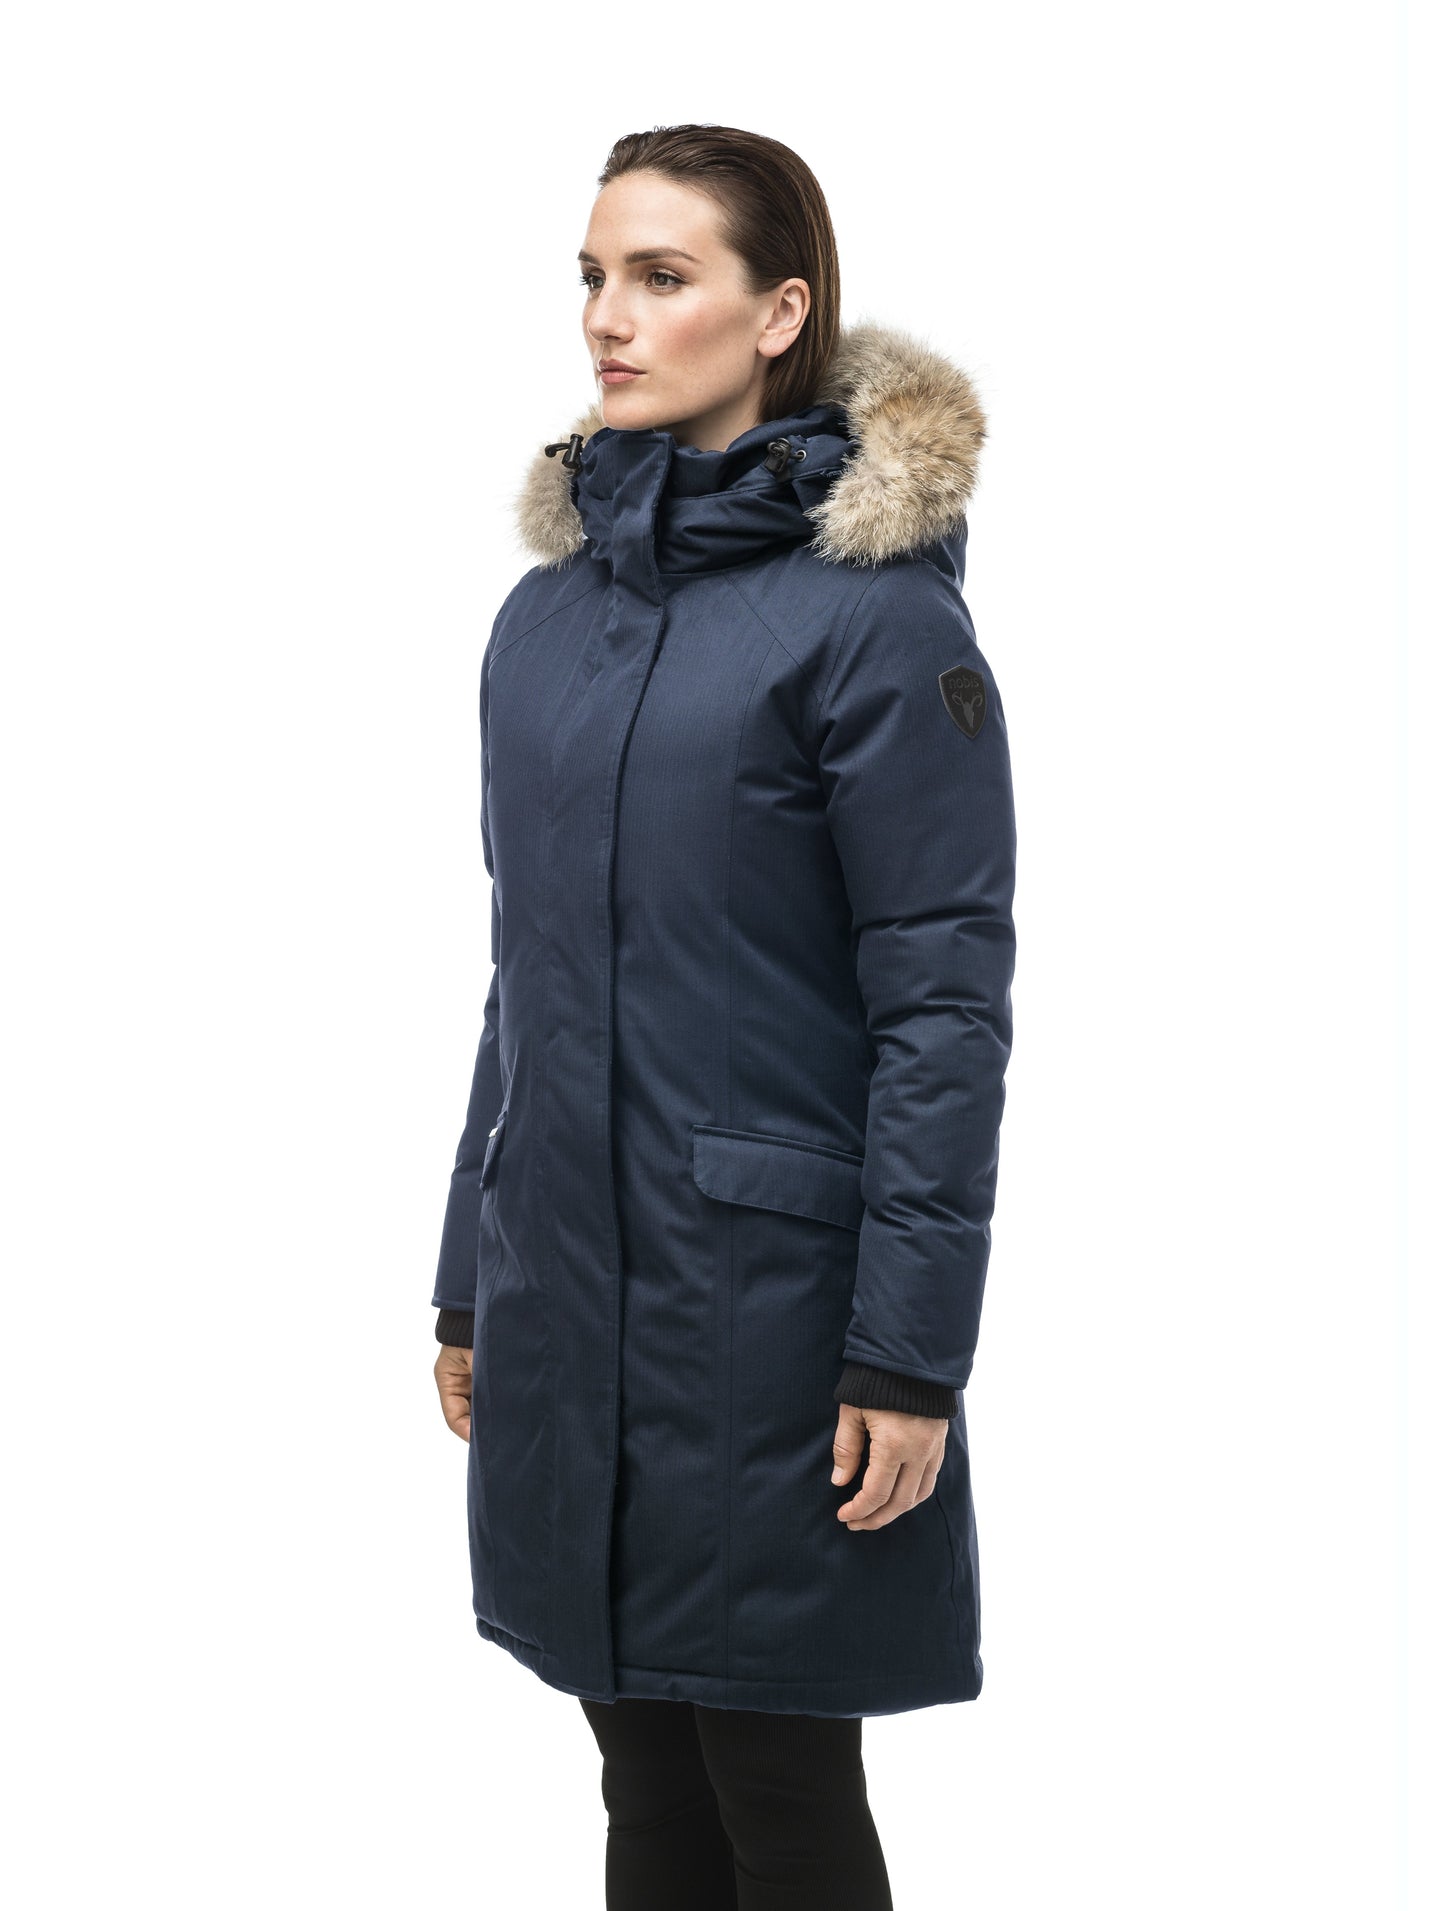 Rebecca Women's Parka in knee length, Canadian duck down insulation, two-way zipper with magnetic front placket, non-removable hood with removable coyote fur trim, in Navy